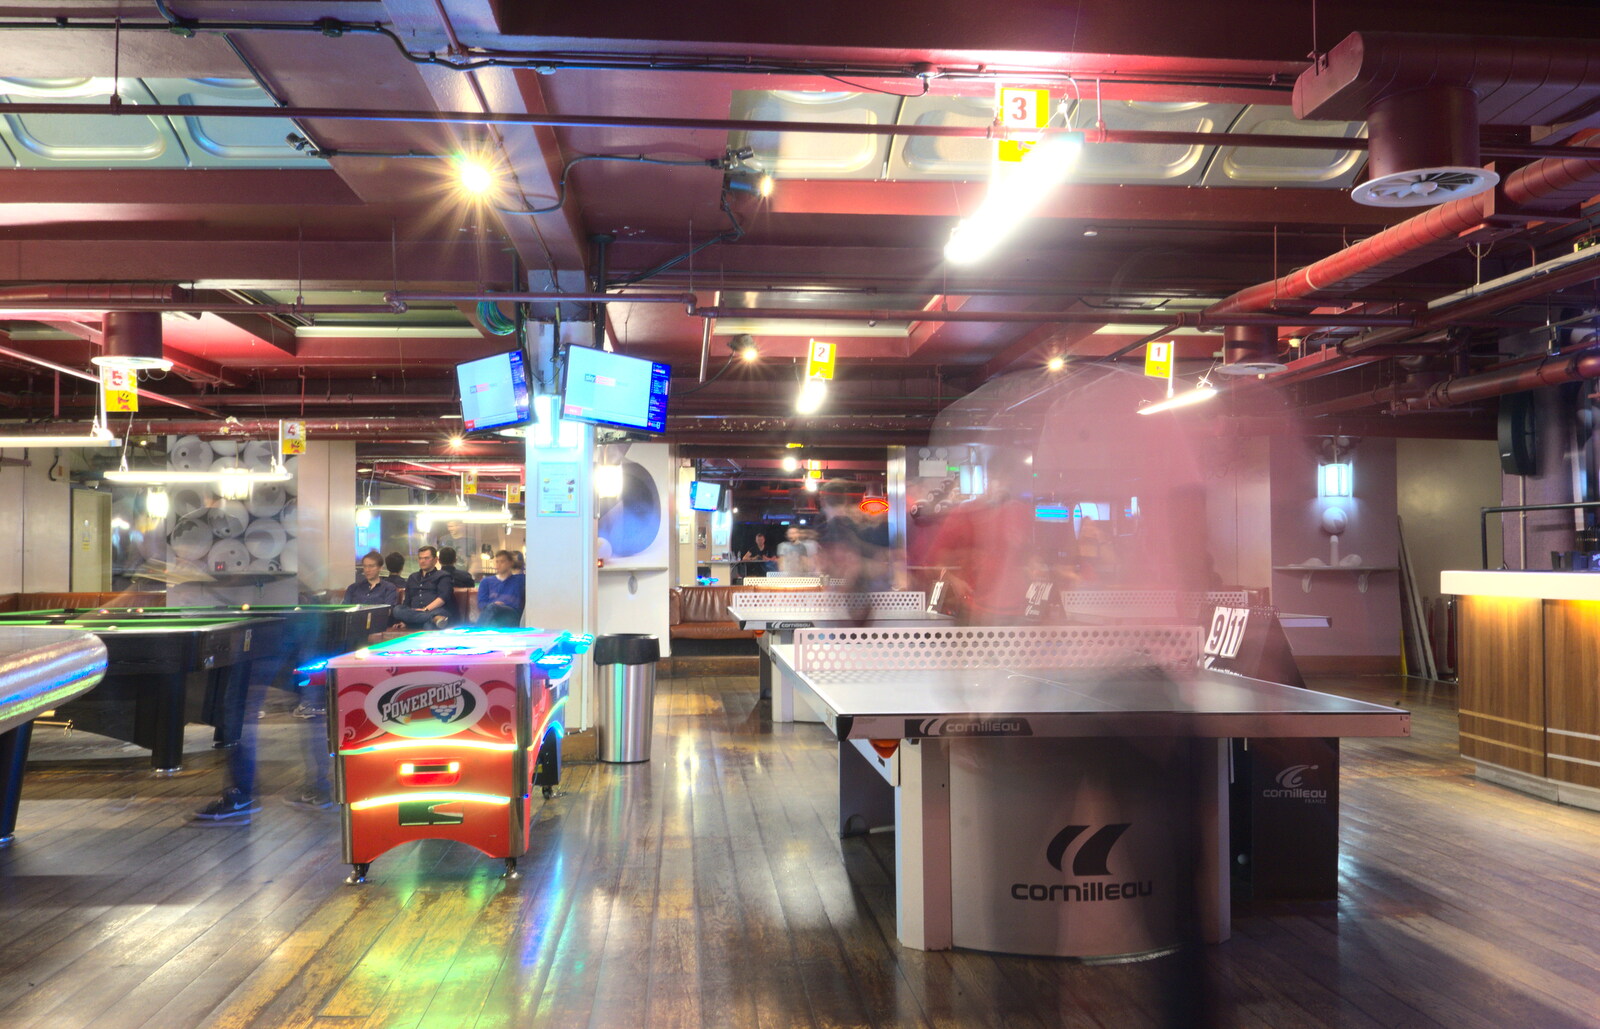 A long exposure in the games room from A Team Outing at Namco Funscape, South Bank, London - 27th March 2019